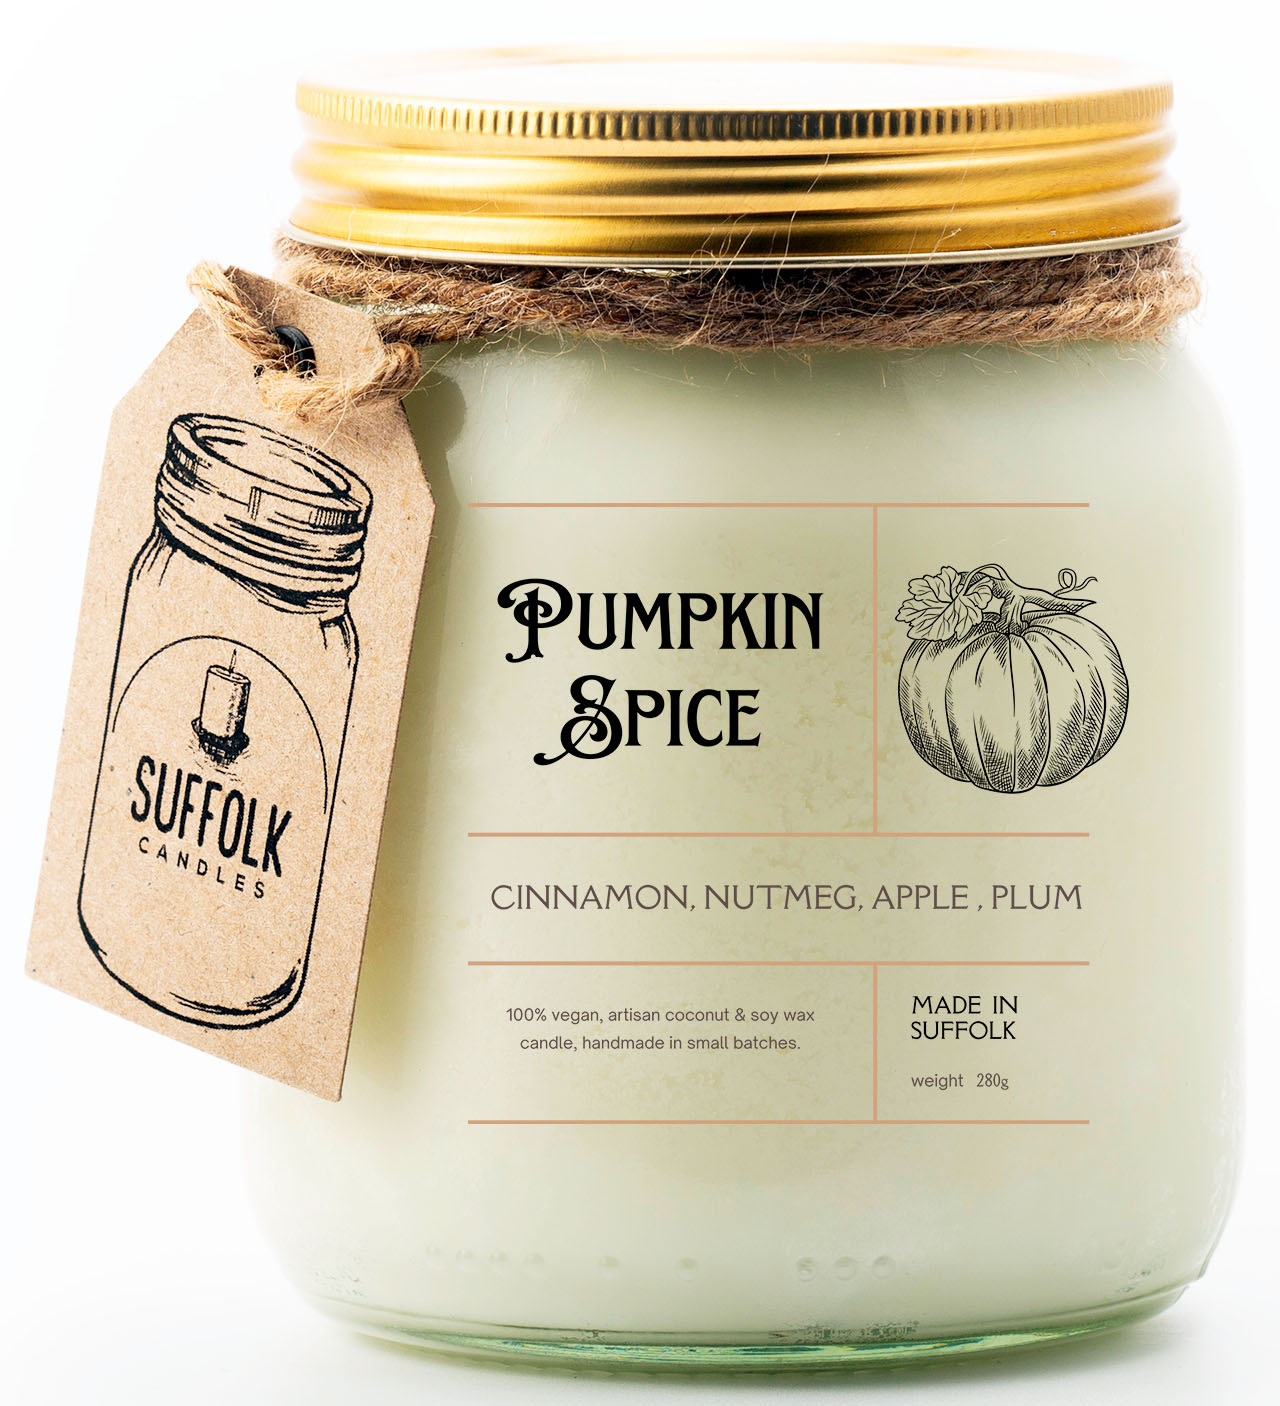 Pumpkin Spice Scented Candle | Rich spicy fruity blend with notes of cinnamon, nutmeg